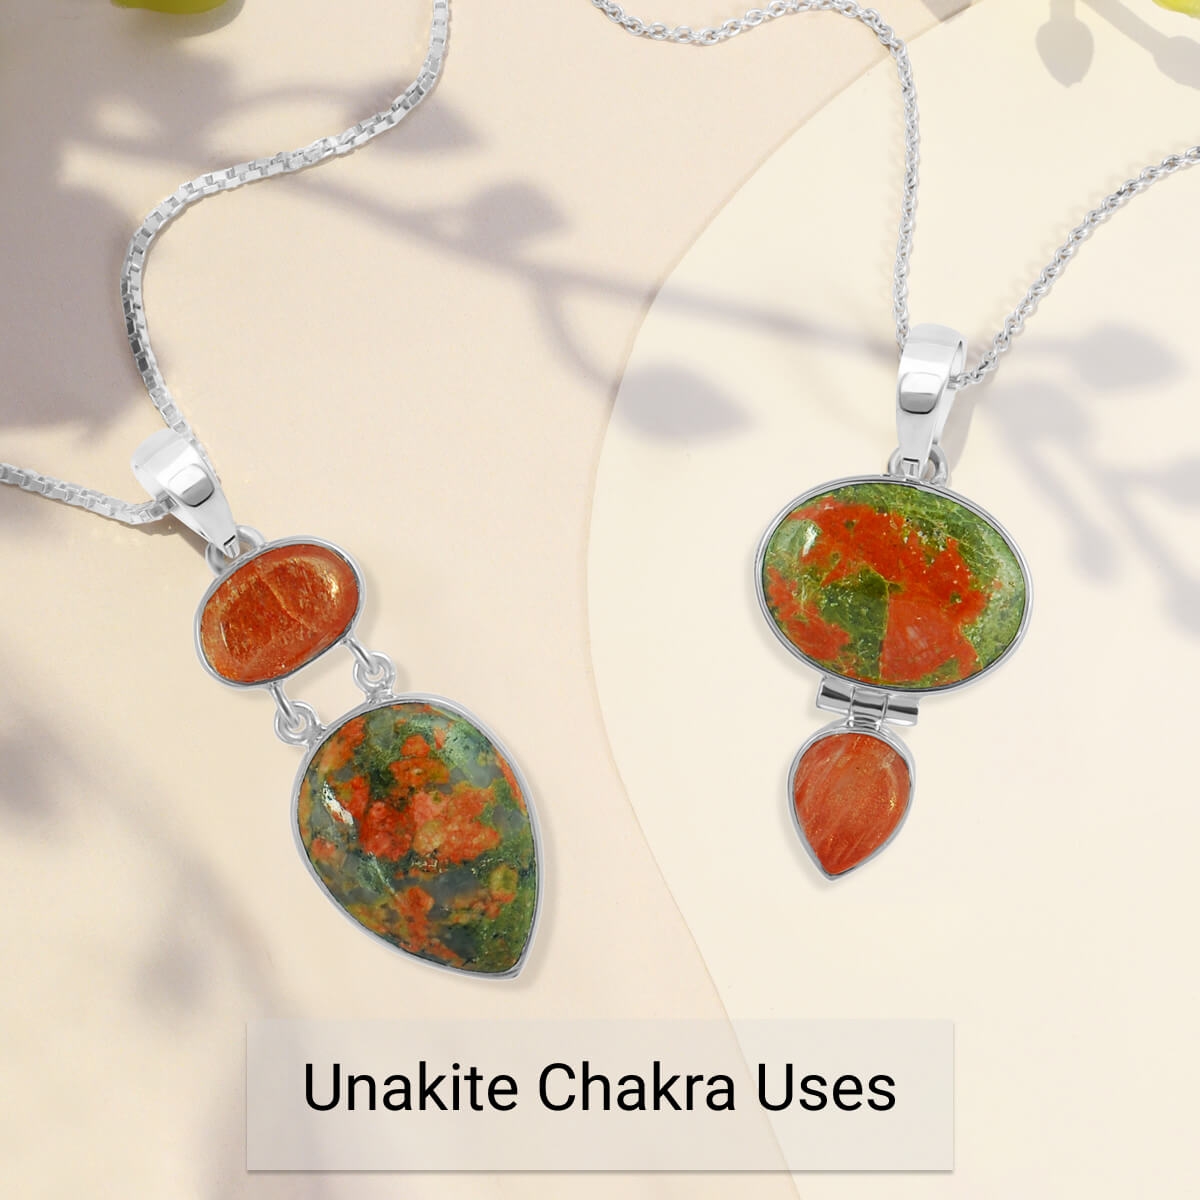 What Chakra Is Unakite Good For?